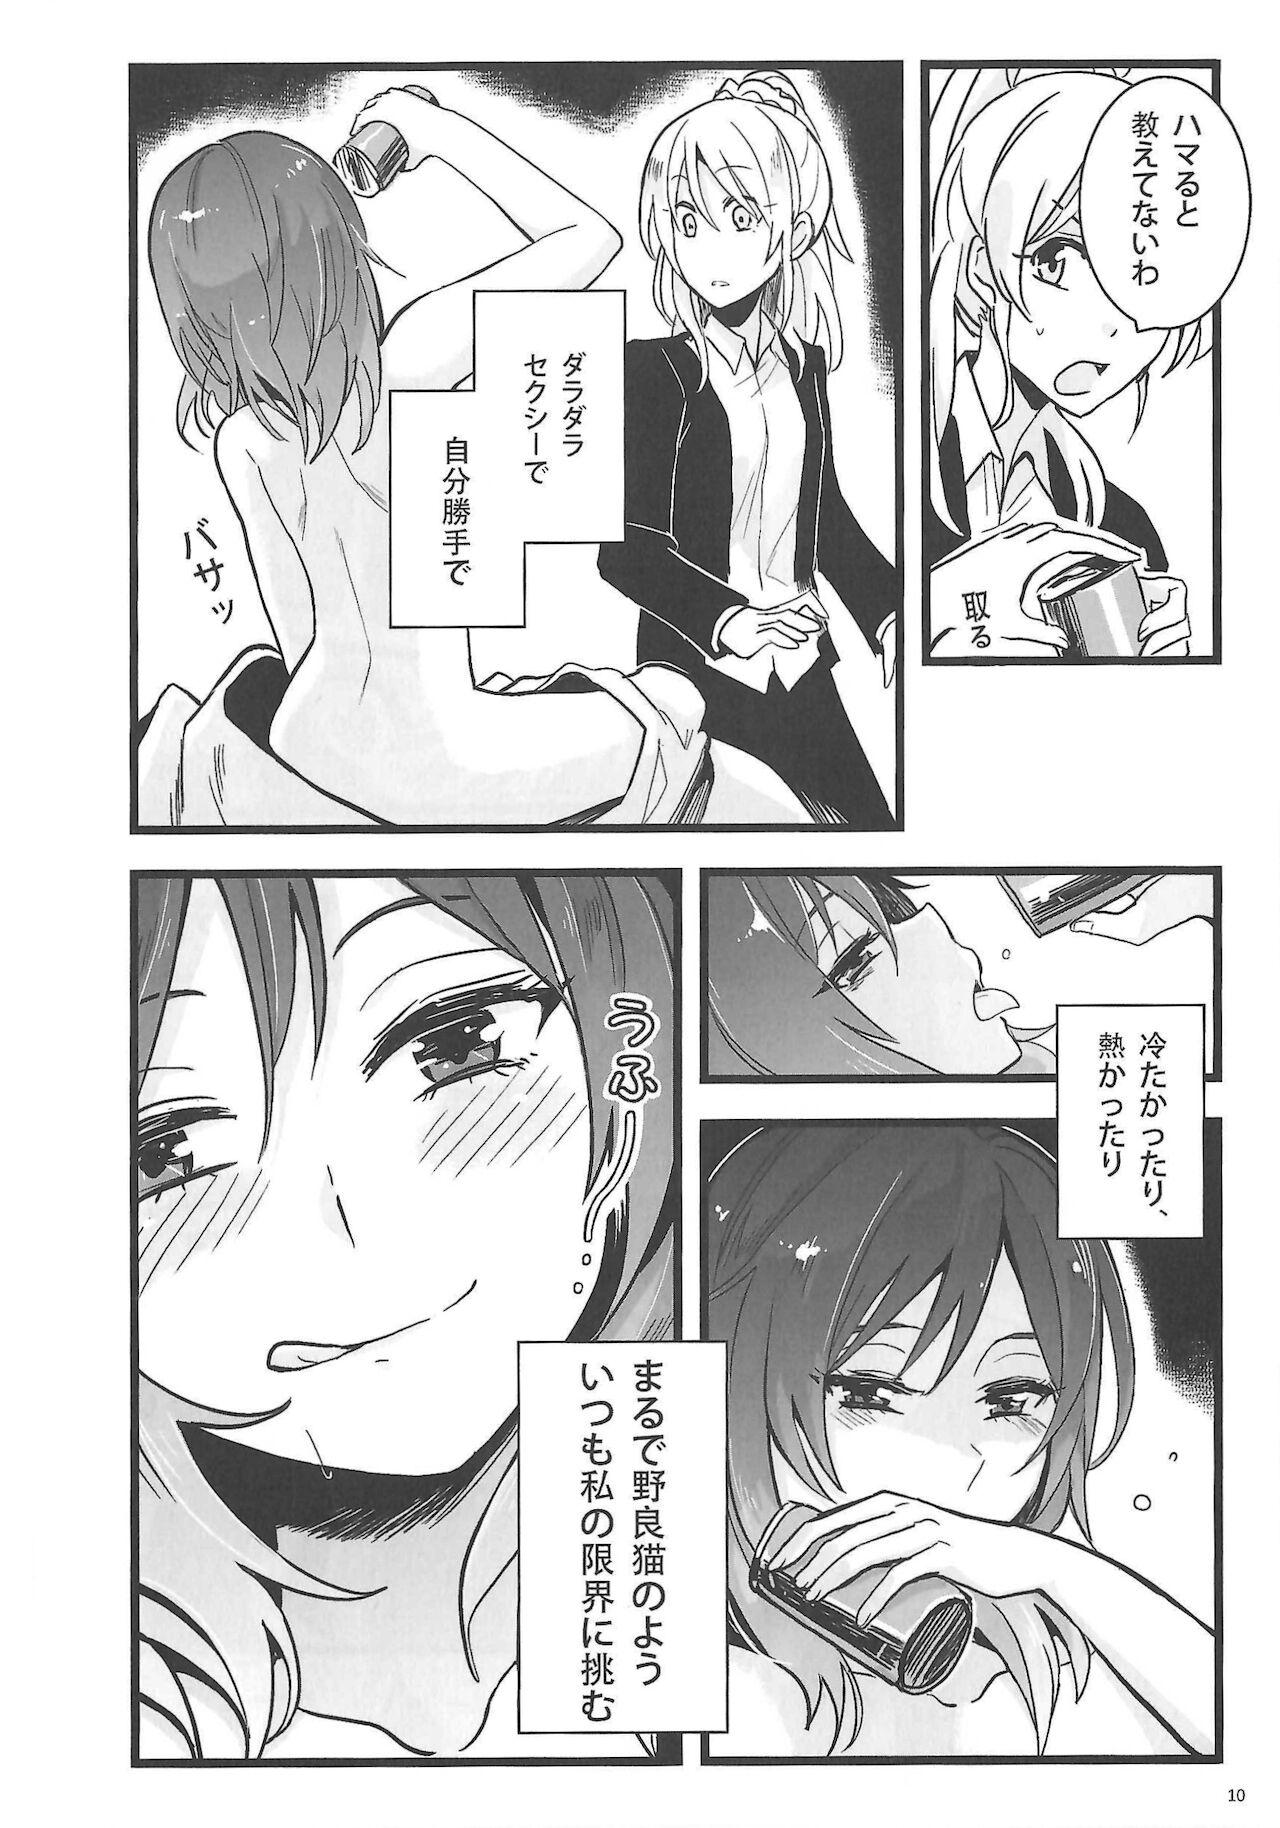 Bra Ode to Losers - Love live Men - Page 11